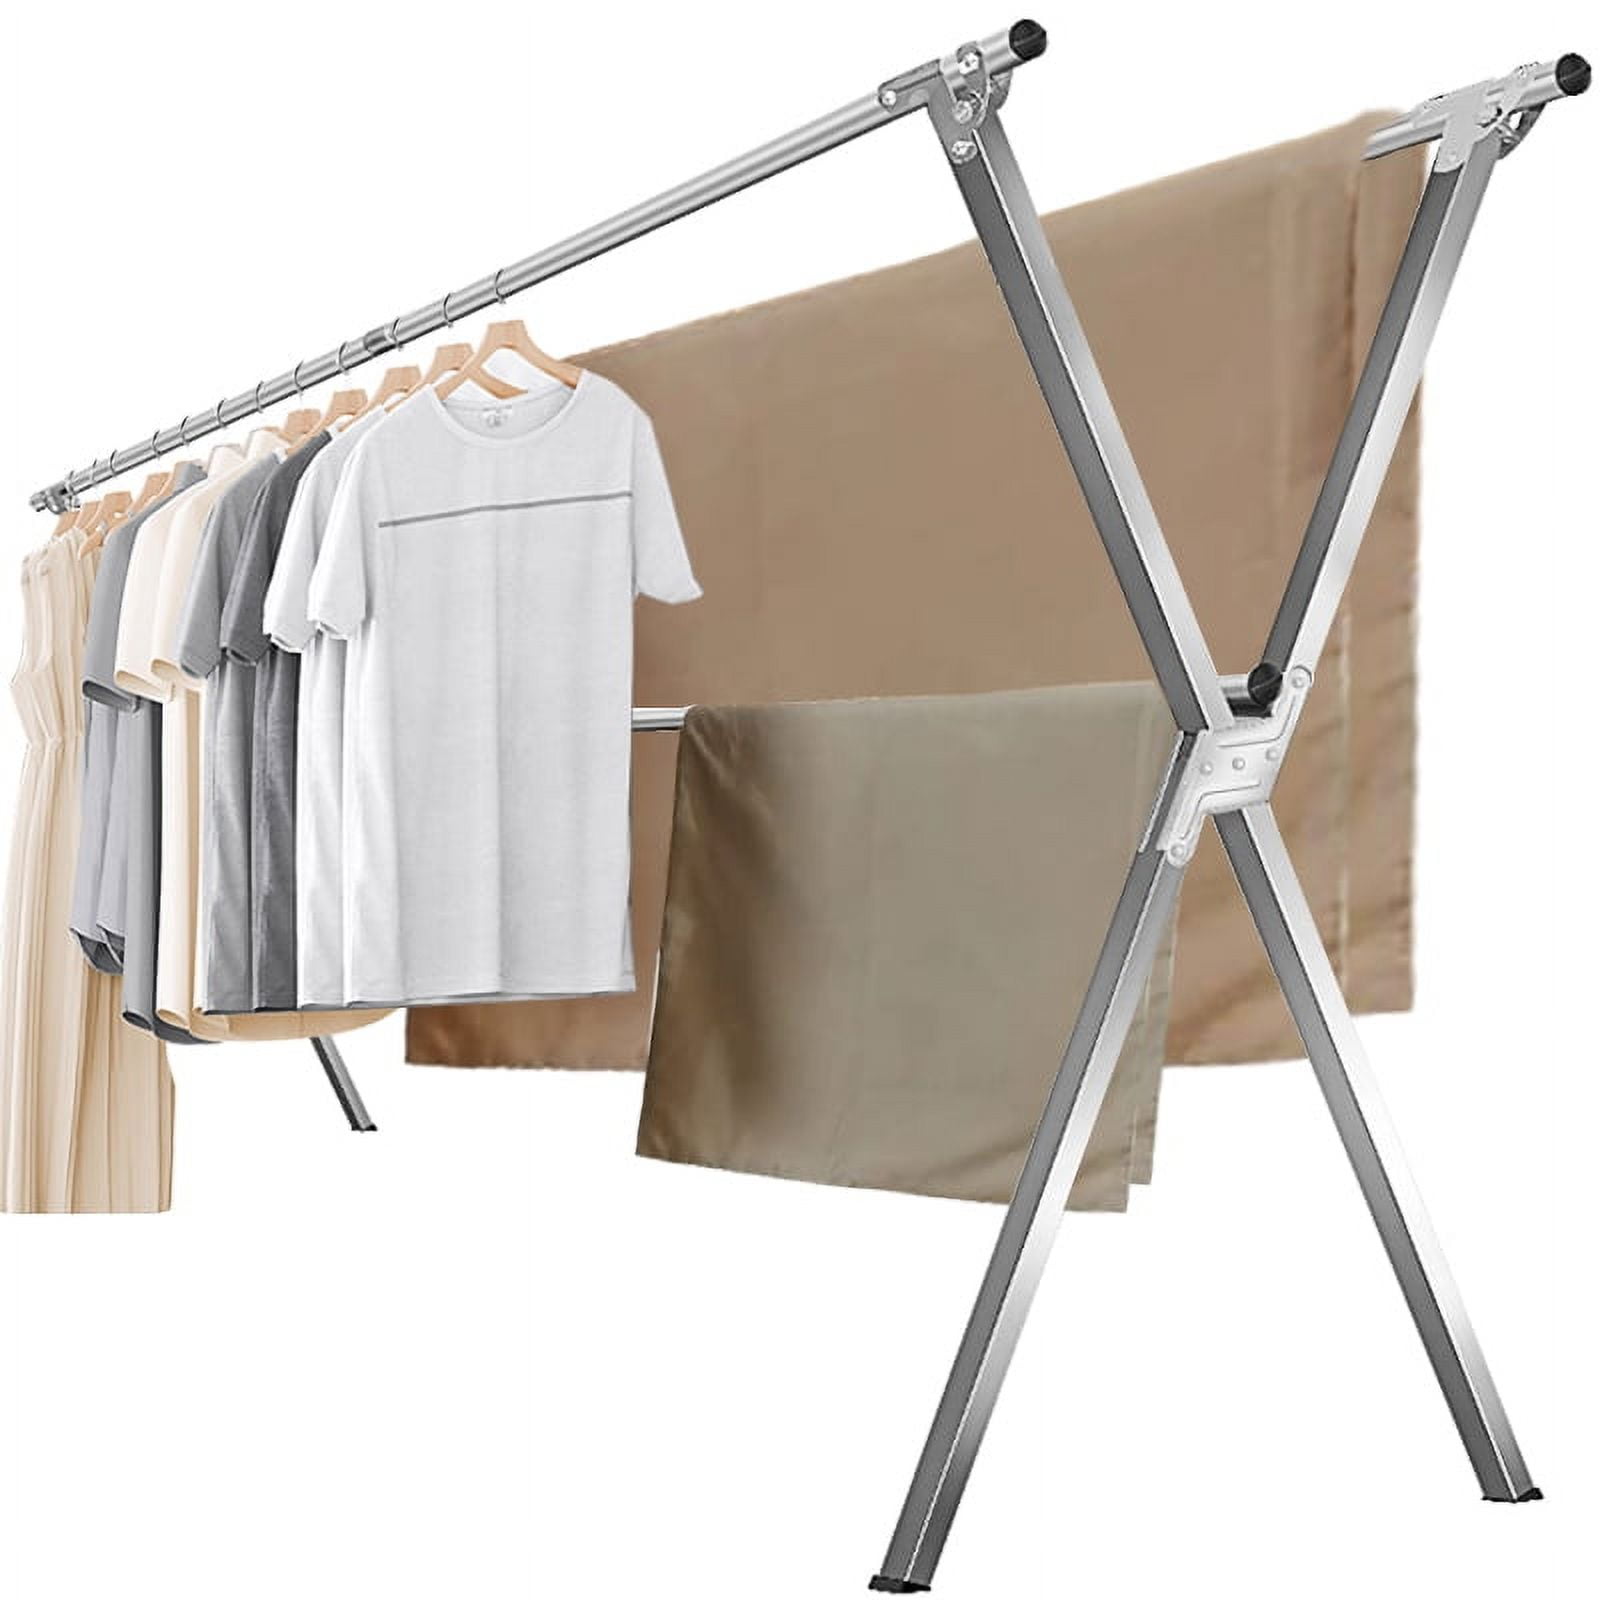 New Stainless Steel Foldable Indoor Clothes Drying Rack